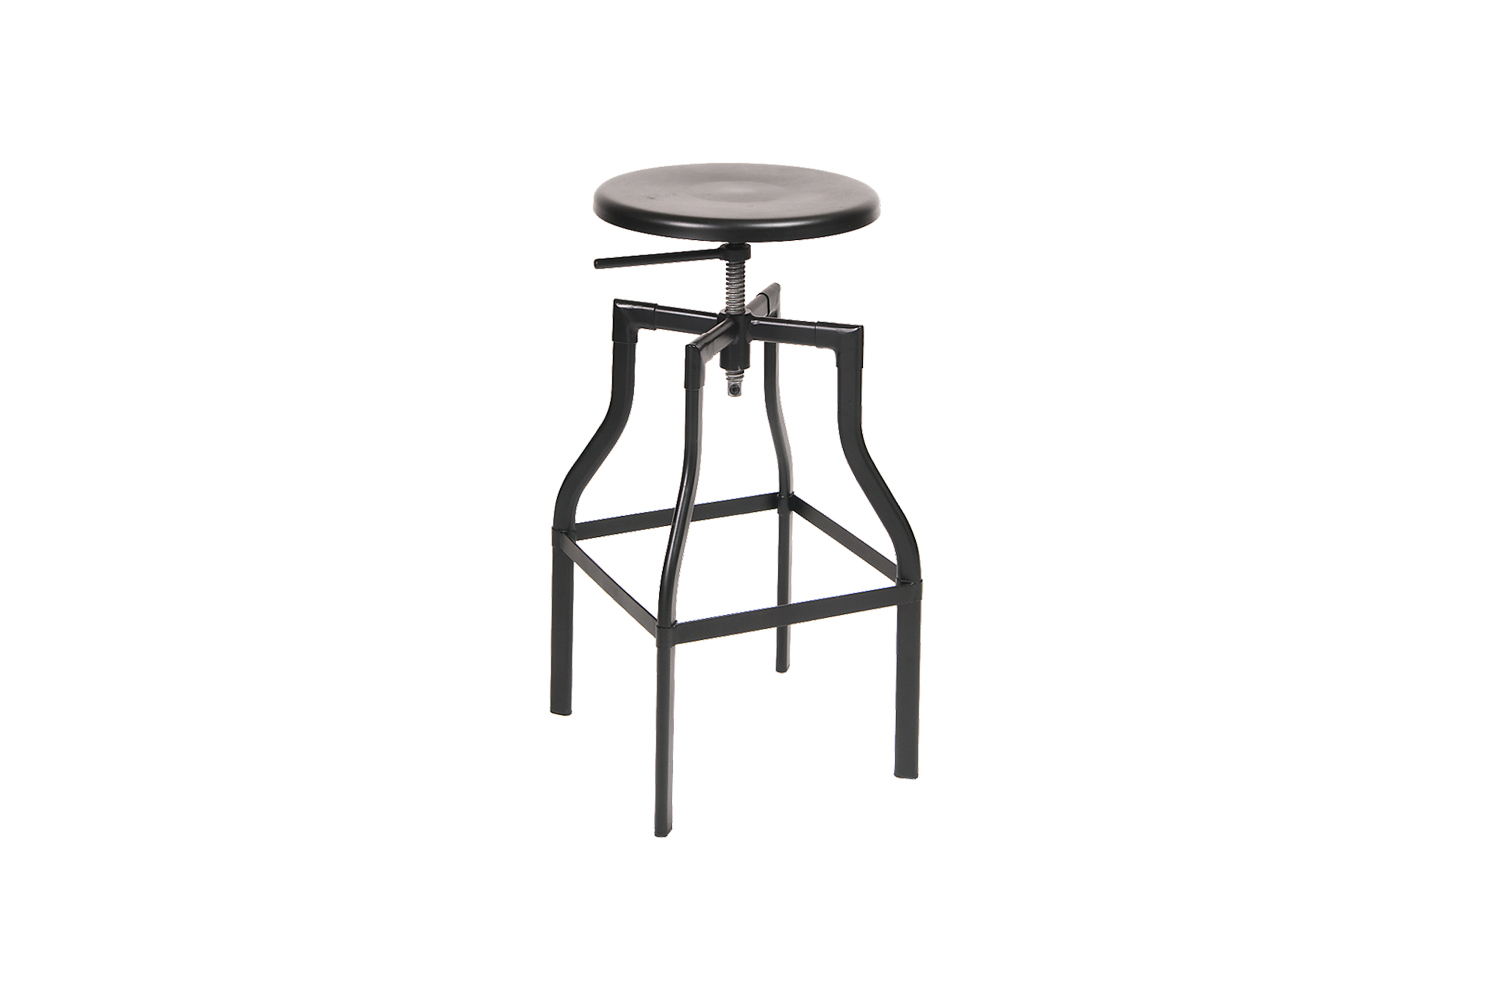 from seats and stools, the adjustable industrial black steel barstool is \$94. 17